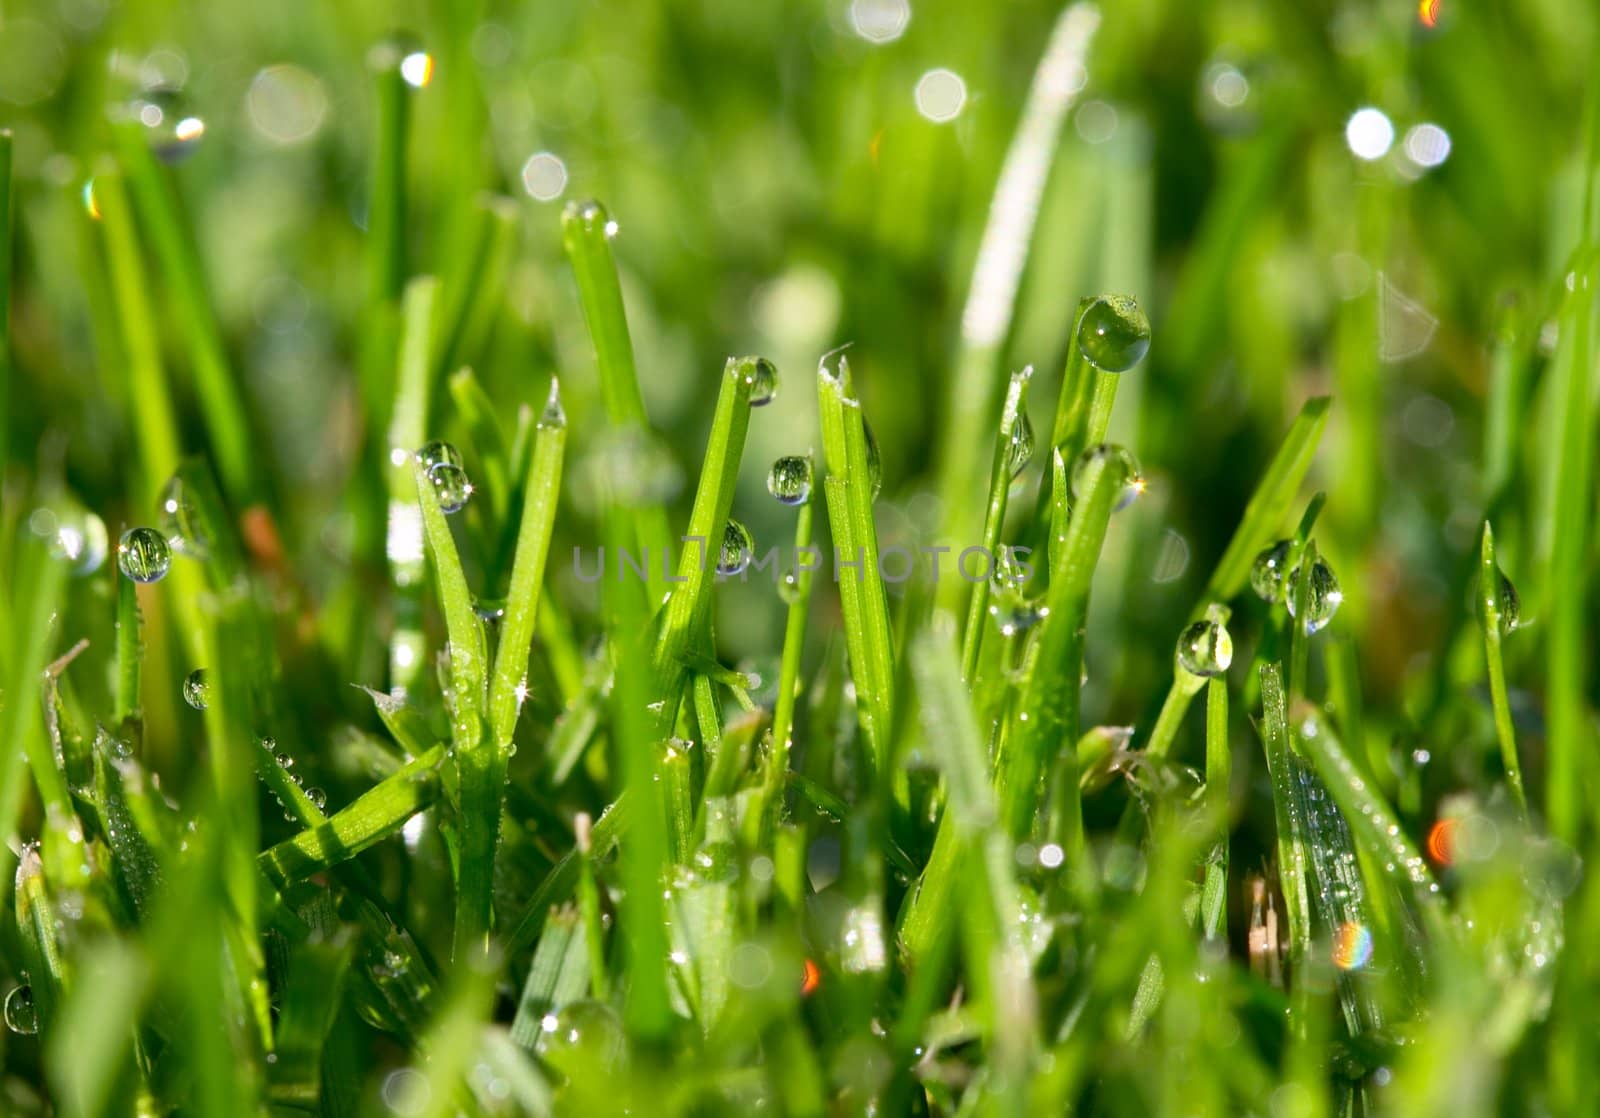 dew drops on the green grass